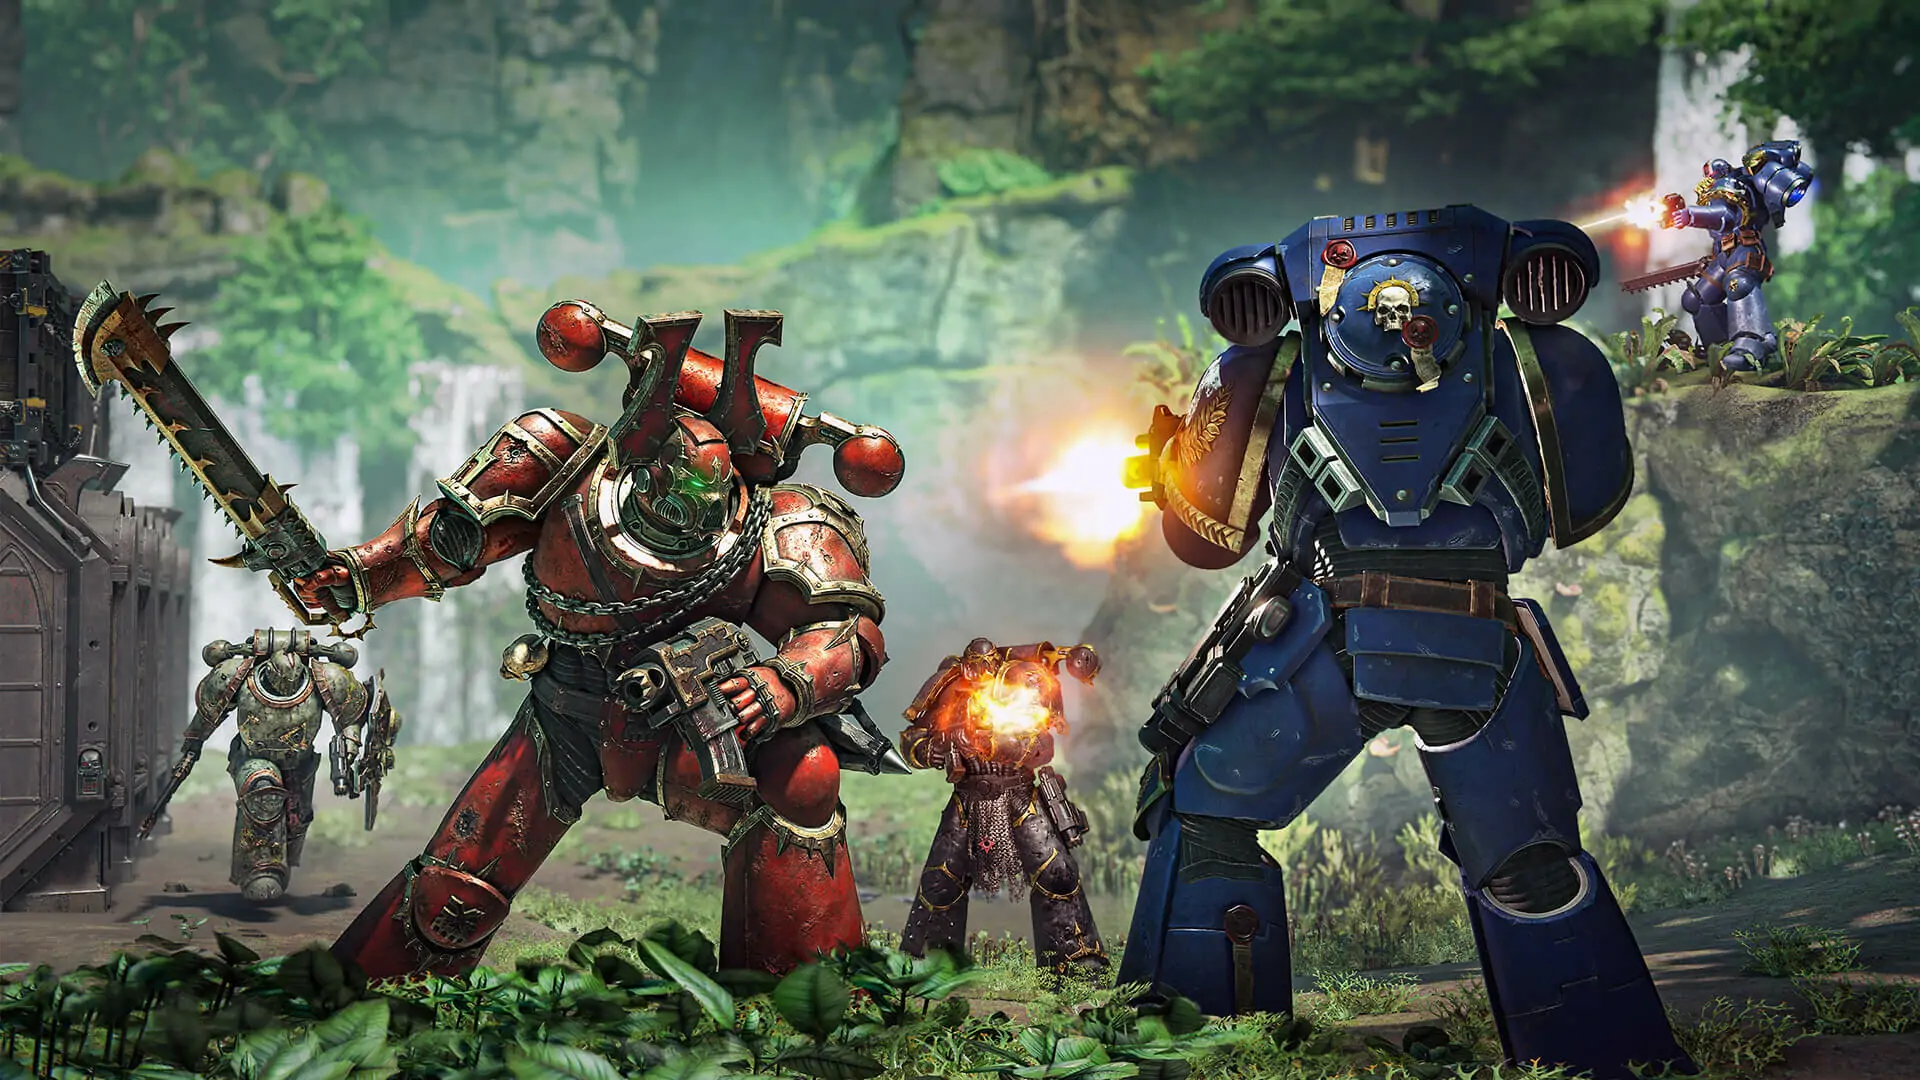 Warhammer 40K: Space Marine 2 Beta Testing Cancelled, Confirm Developers